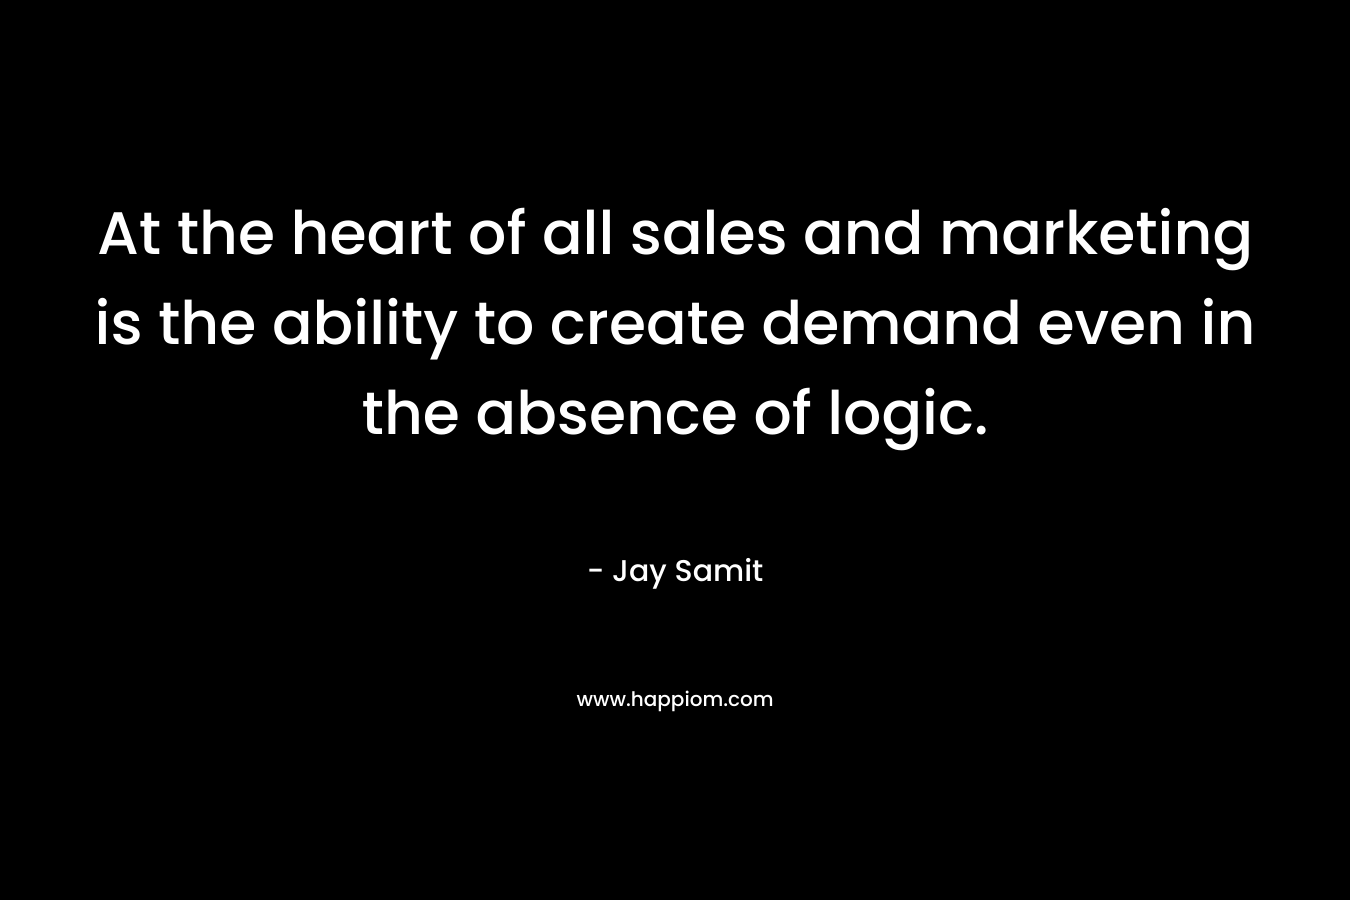 At the heart of all sales and marketing is the ability to create demand even in the absence of logic.